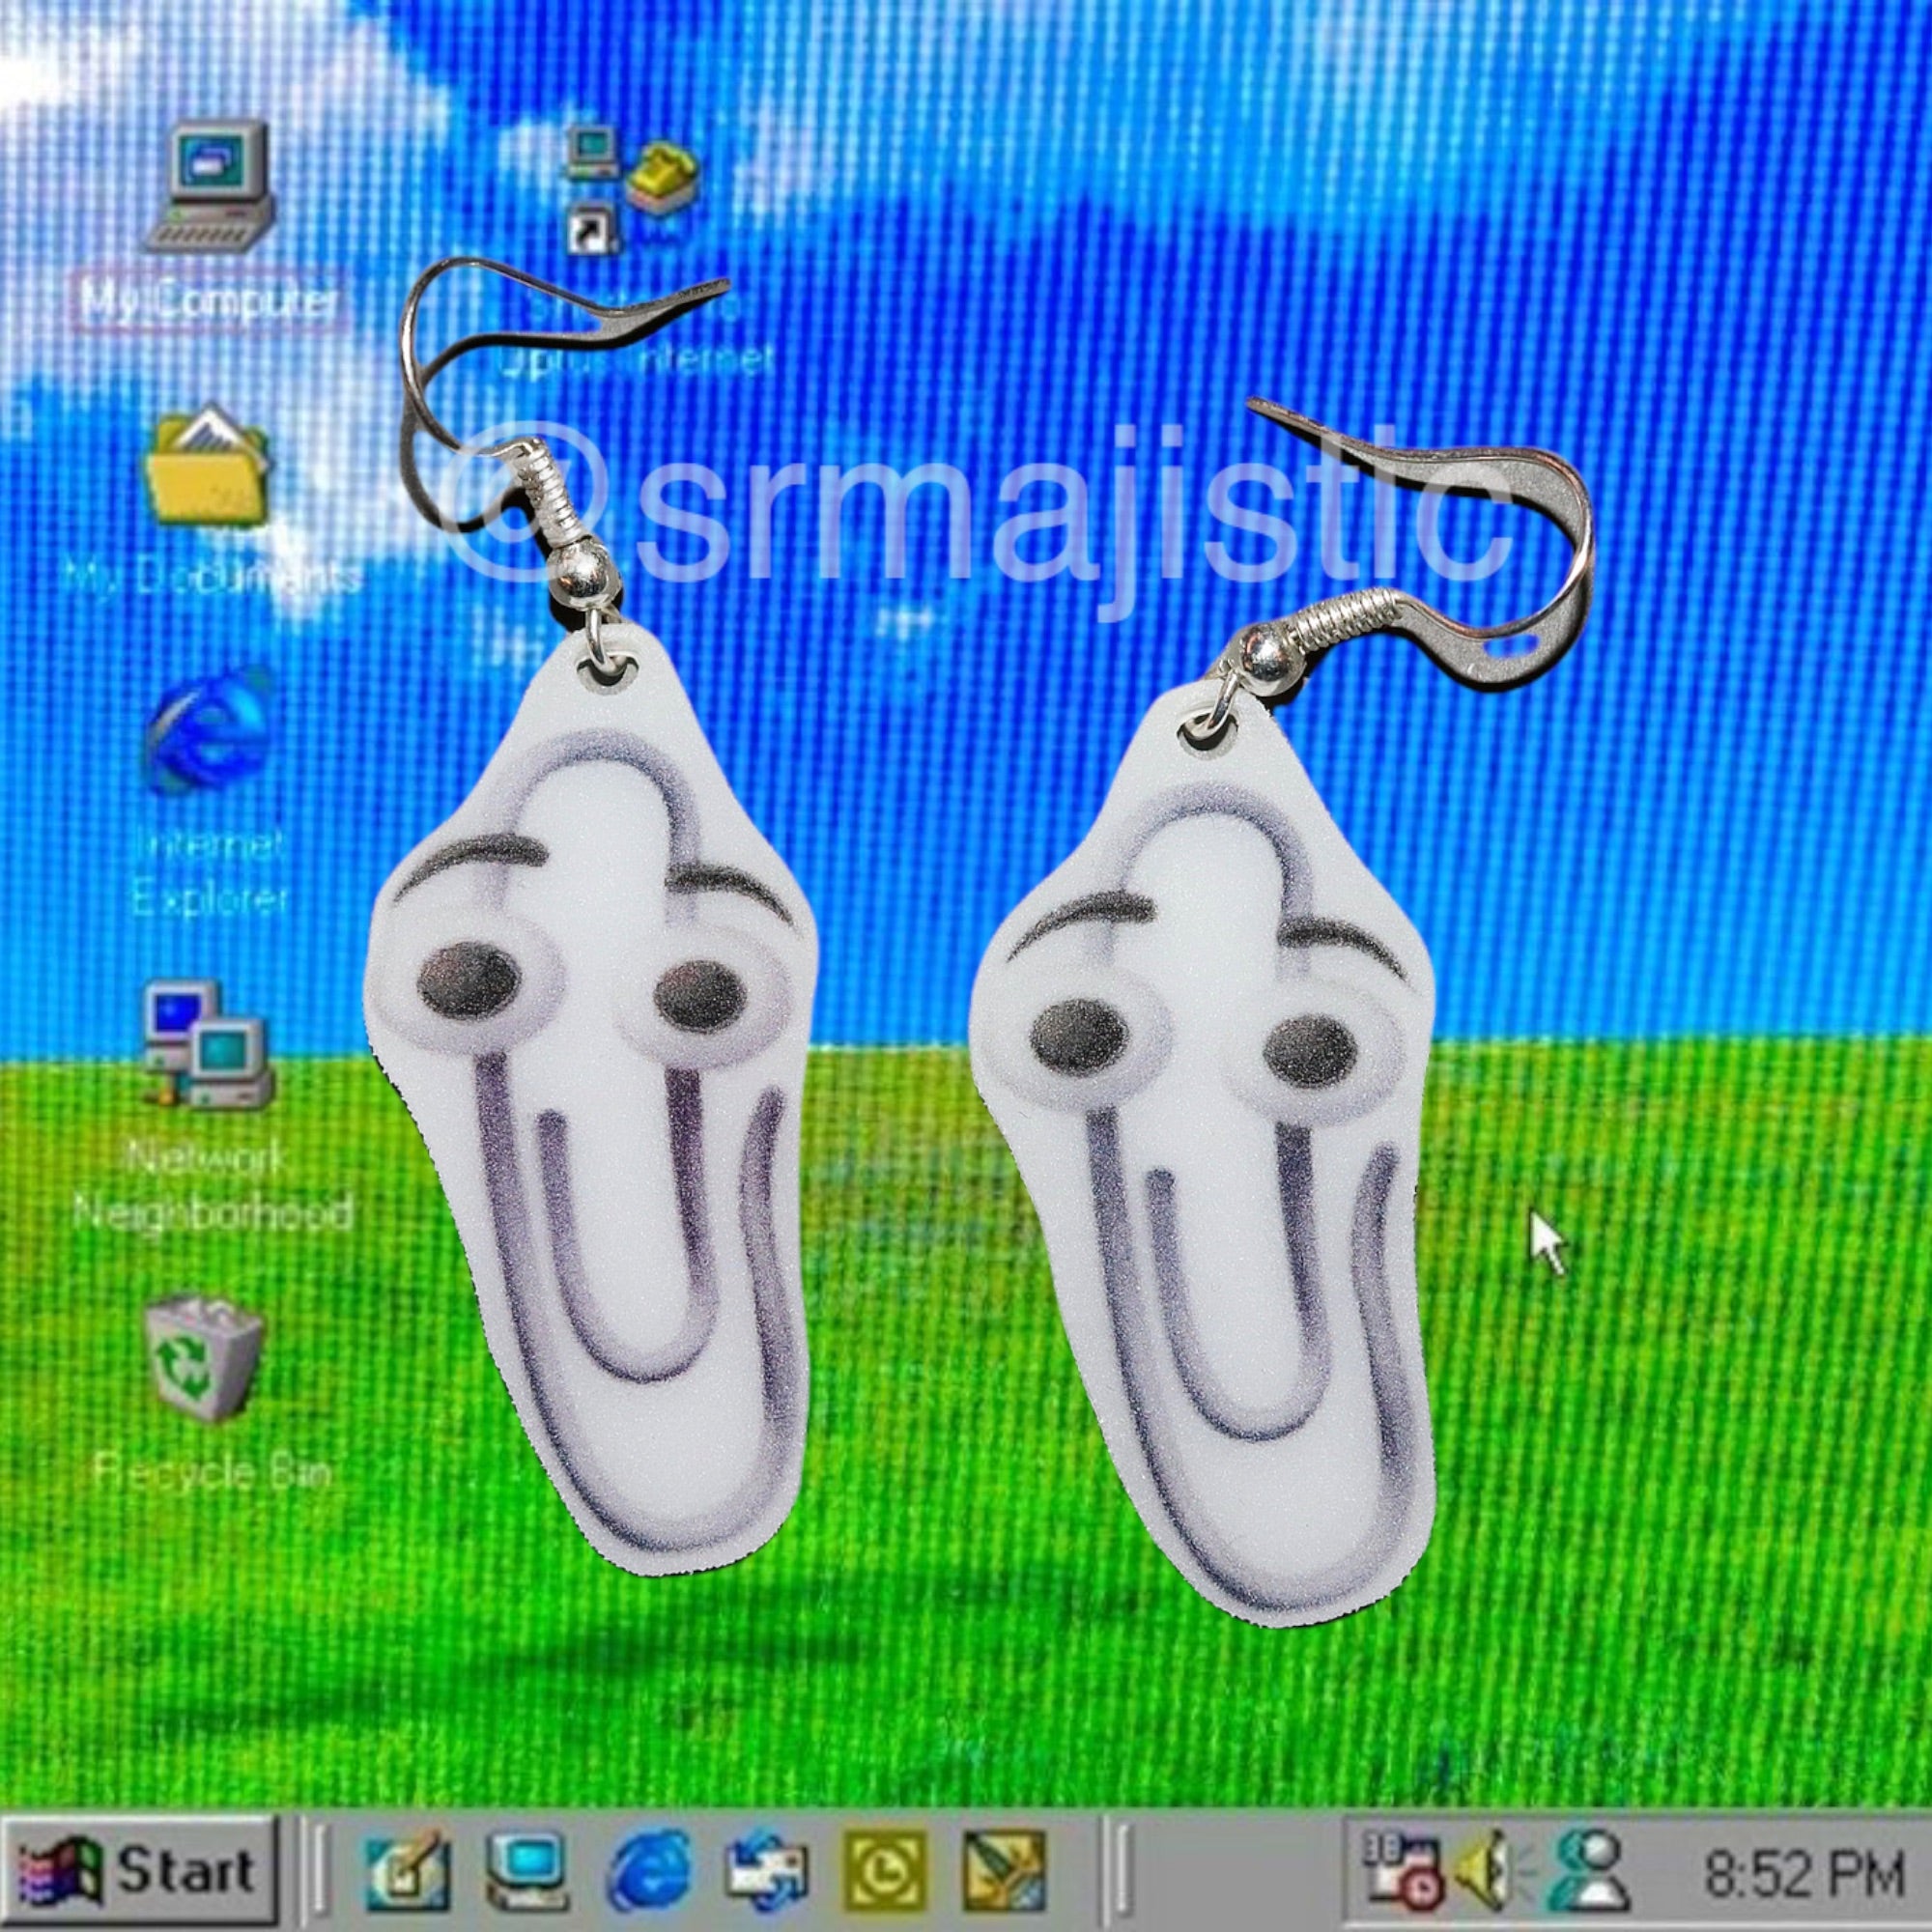 Clippy Microsoft Office Assistant Character Handmade Earrings!